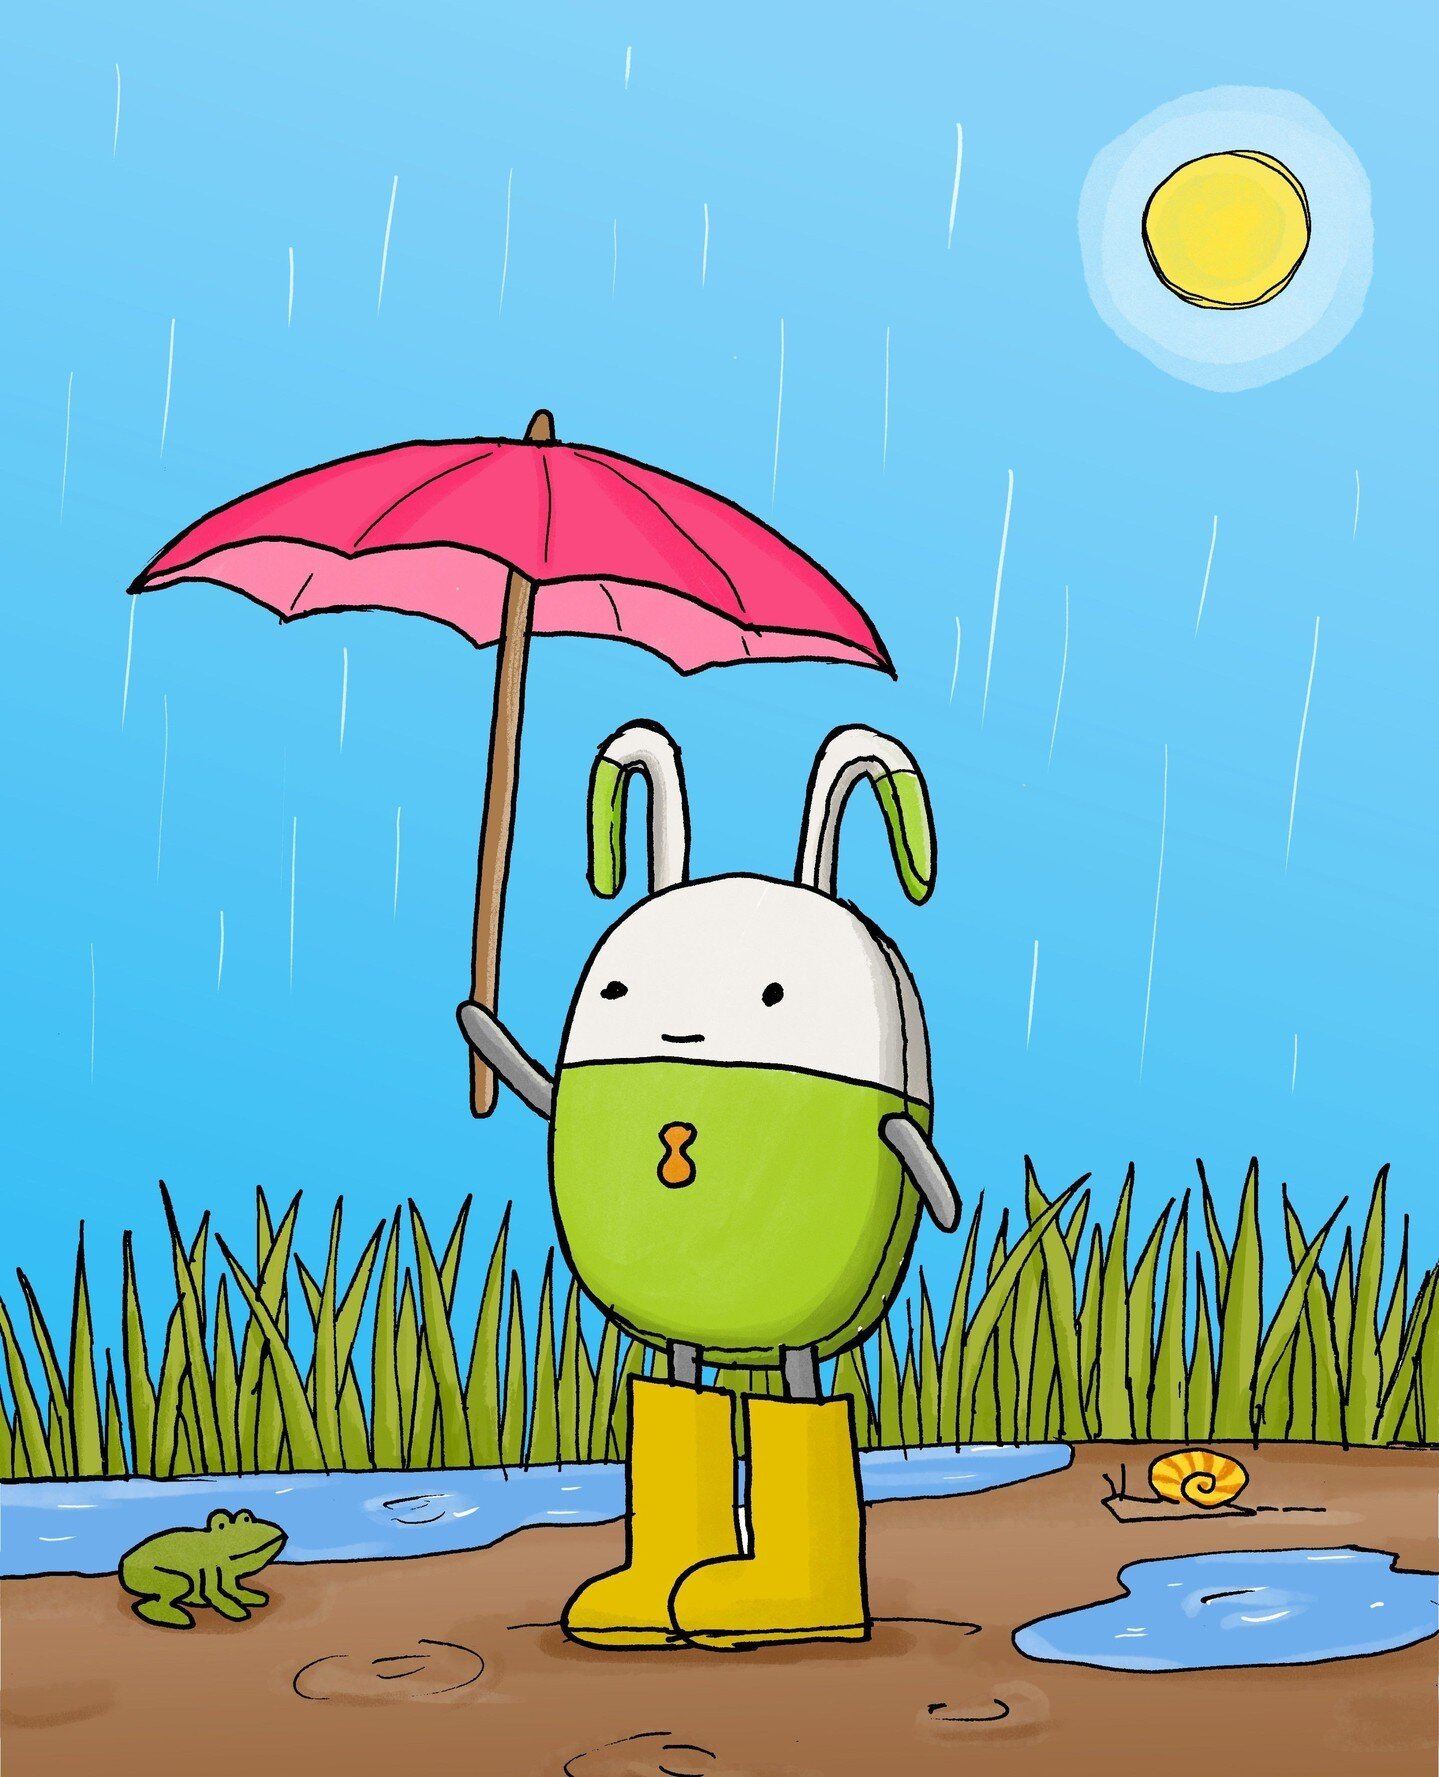 It's spring break season! Doing anything fun with your kids?⁠
⁠
This time is also famous for those April showers. But, LuMi doesn't let that spoil their fun. They like nothing more than splashing in the puddles, and everywhere they look rain-loving c